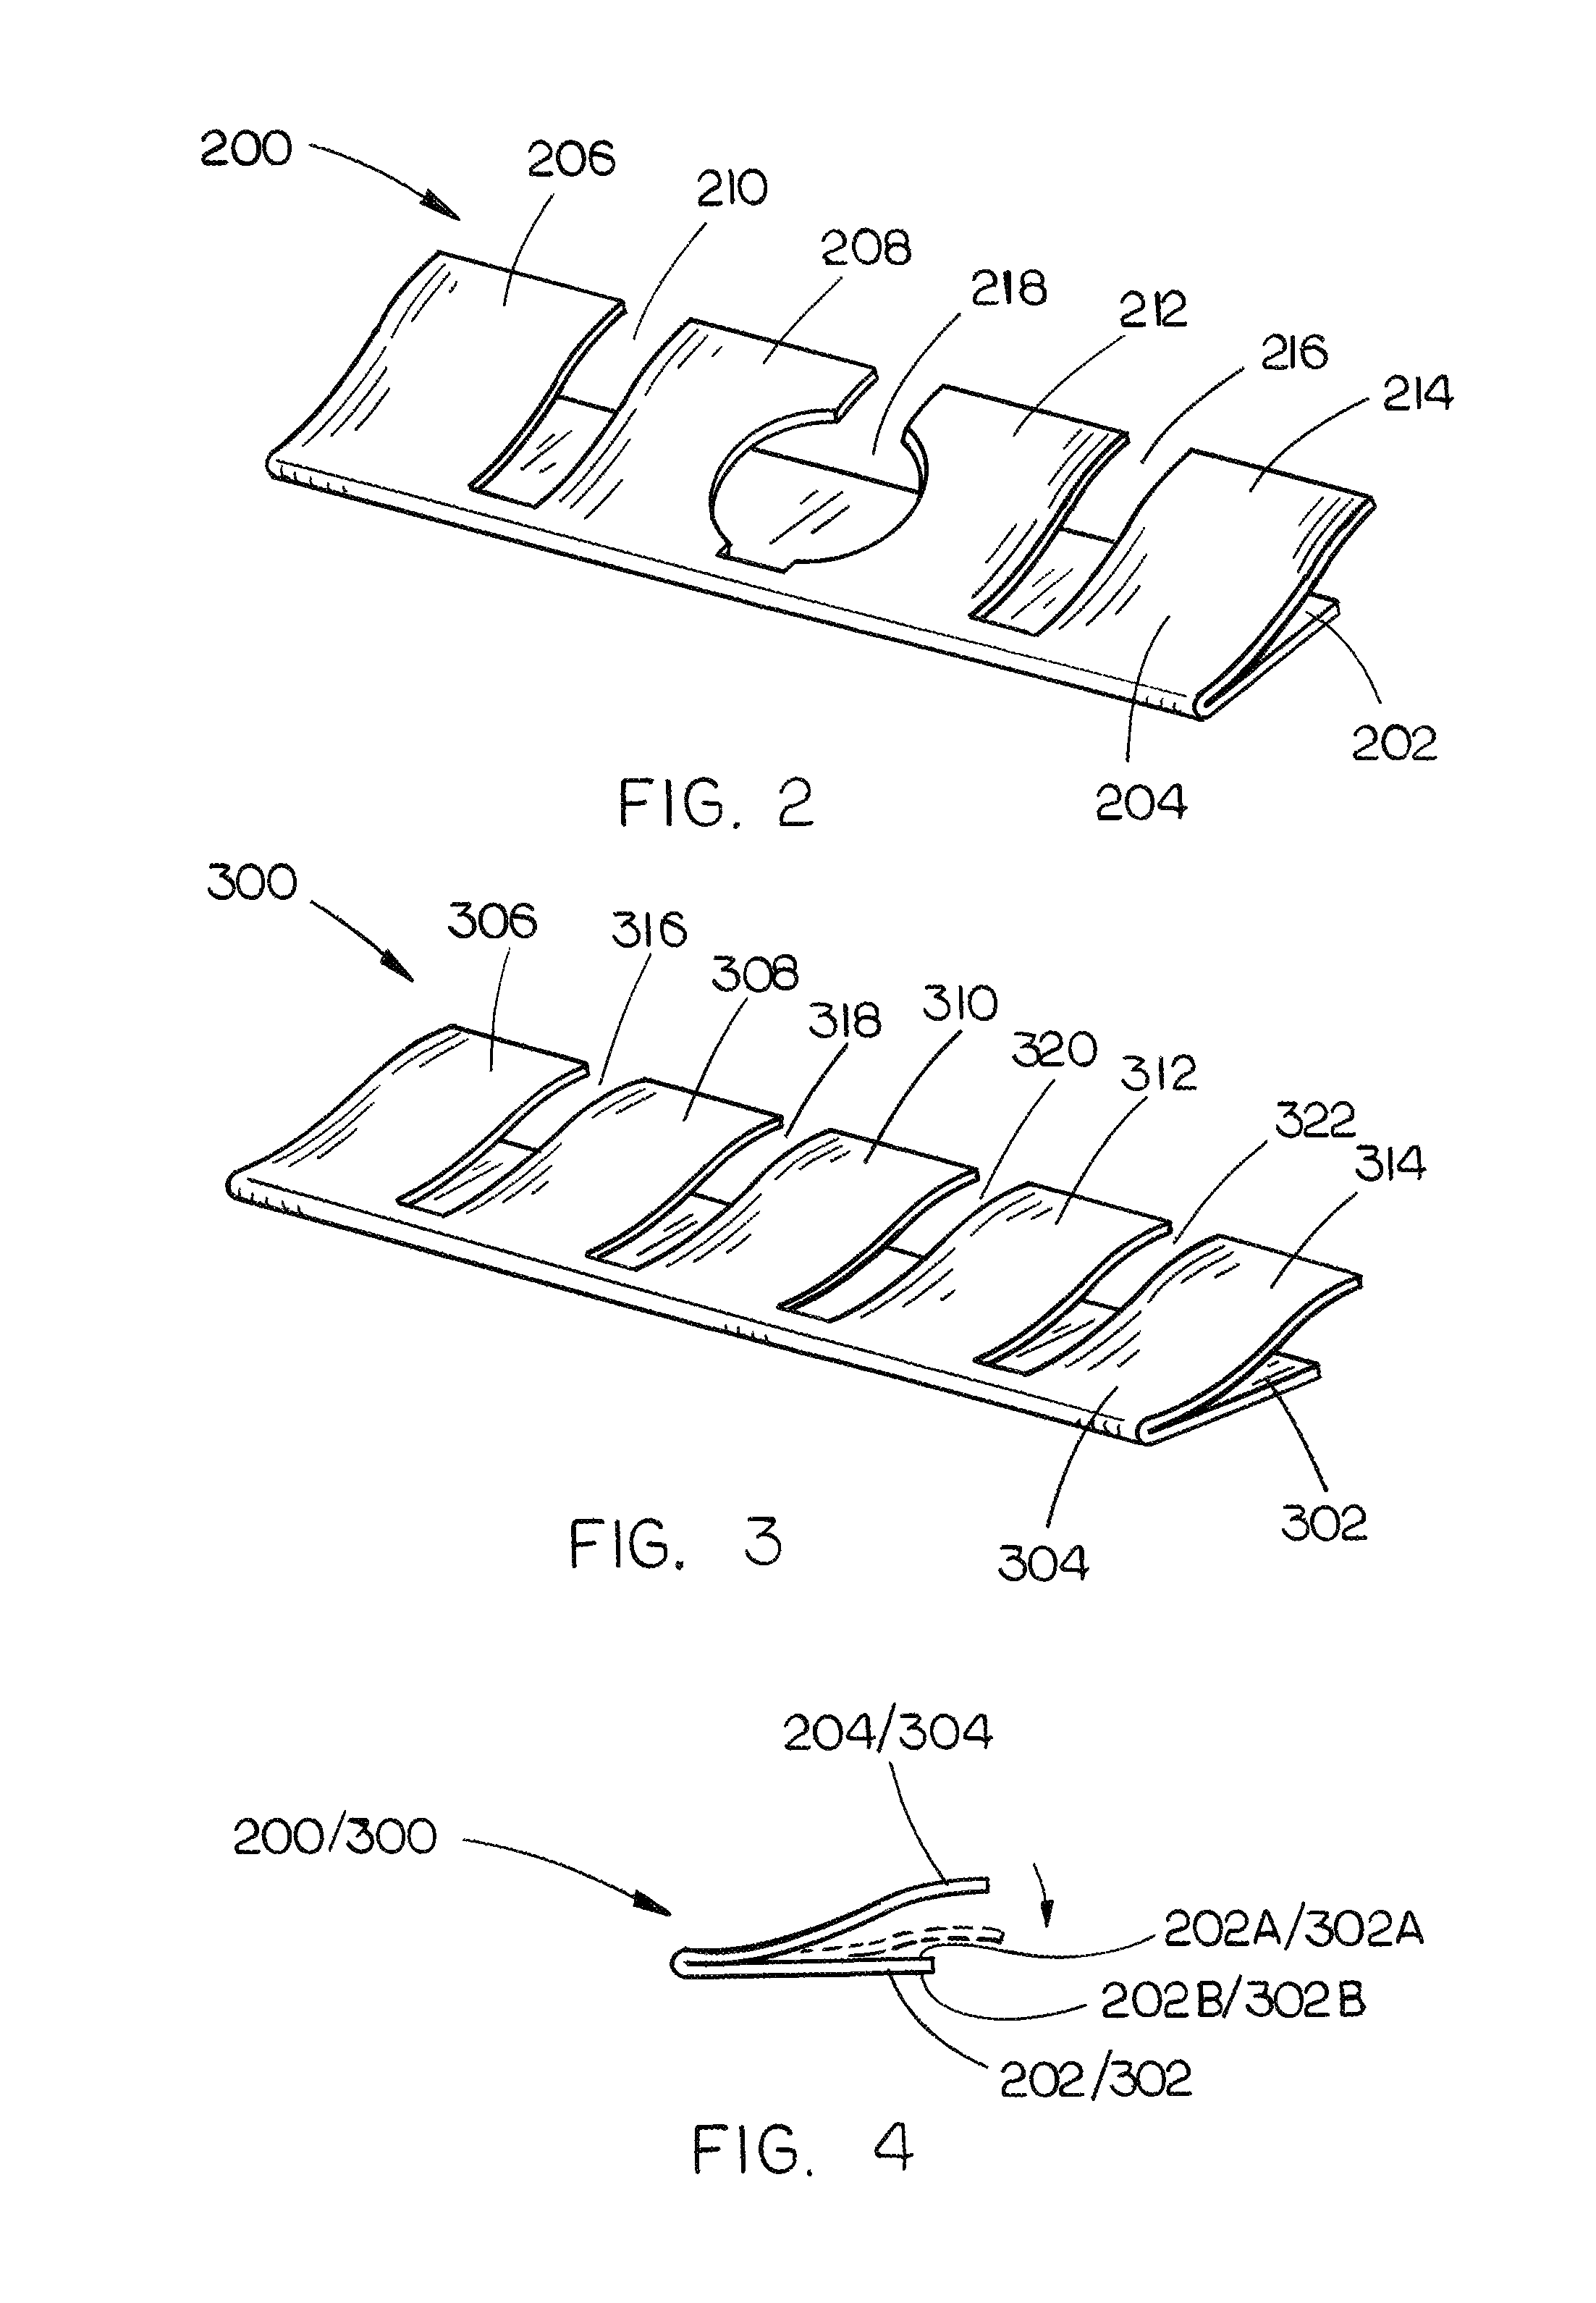 Miniature surface mount technology electromagnetic interference shielding device